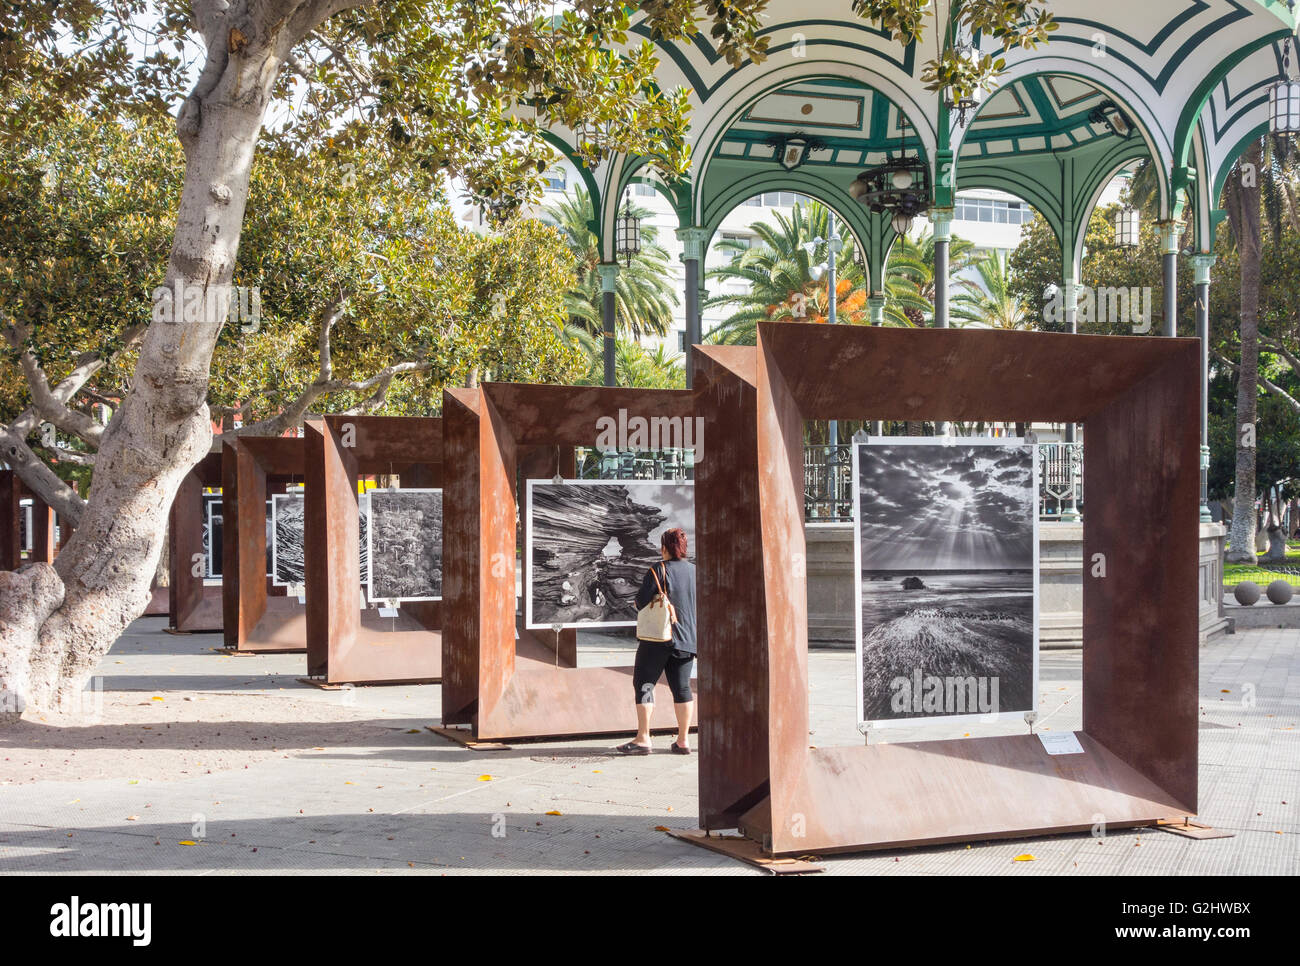 Las Palmas, Gran Canaria, Canary Islands, Spain, 1st June 2016. Glorious weather for a stroll around the `Genesis` exhibition by famous Brazilian photographer Sebastiao Salgado in Parque San Telmo in Las Palmas, the capital of Gran Canaria. The open air exhibition runs until 21st June 2016 - part of the city`s `art in the street` iniciative. Credit:  Alan Dawson News/Alamy Live News Stock Photo